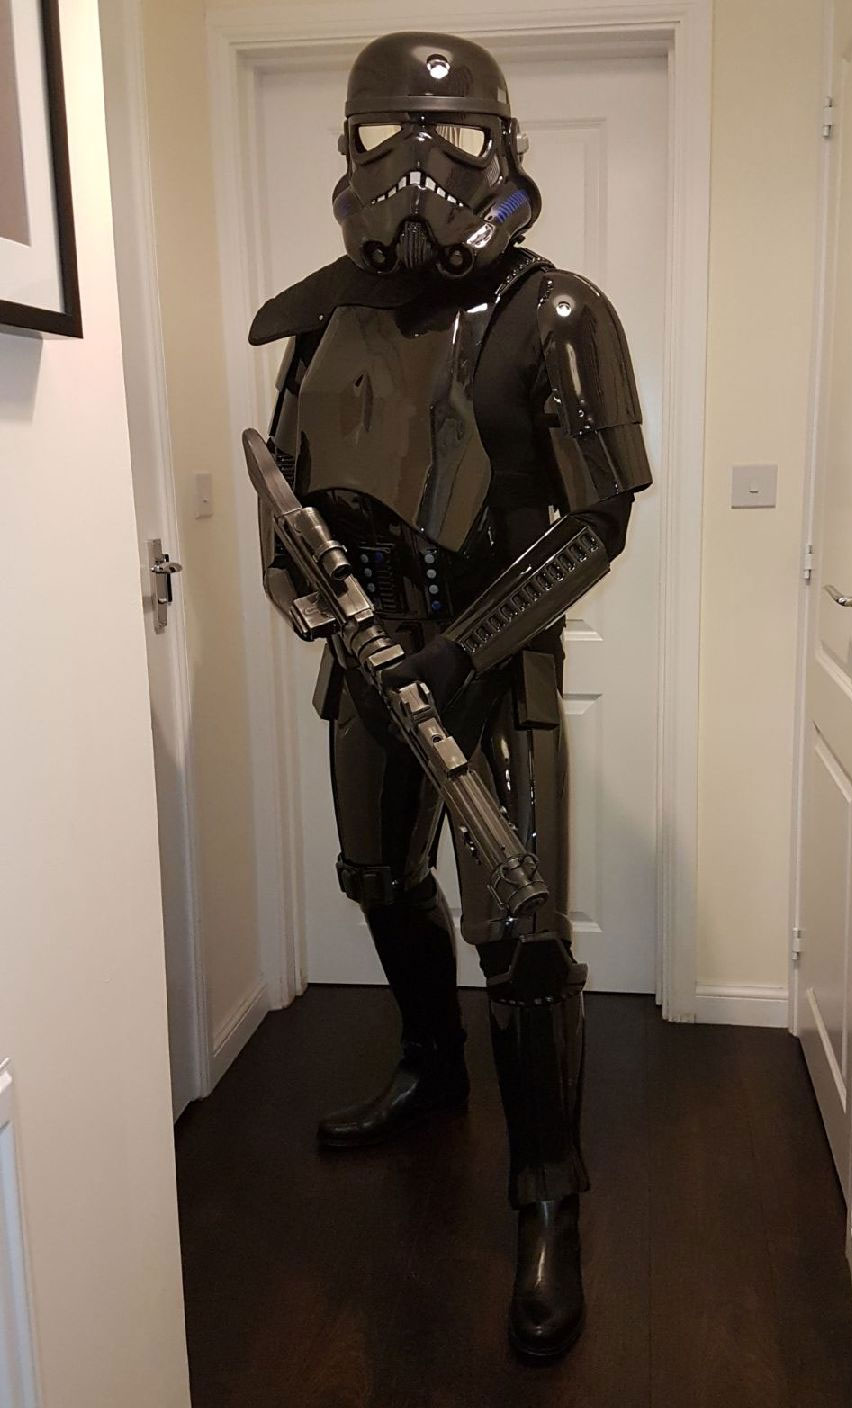 Replica Shadowtrooper Armour Review from Marc